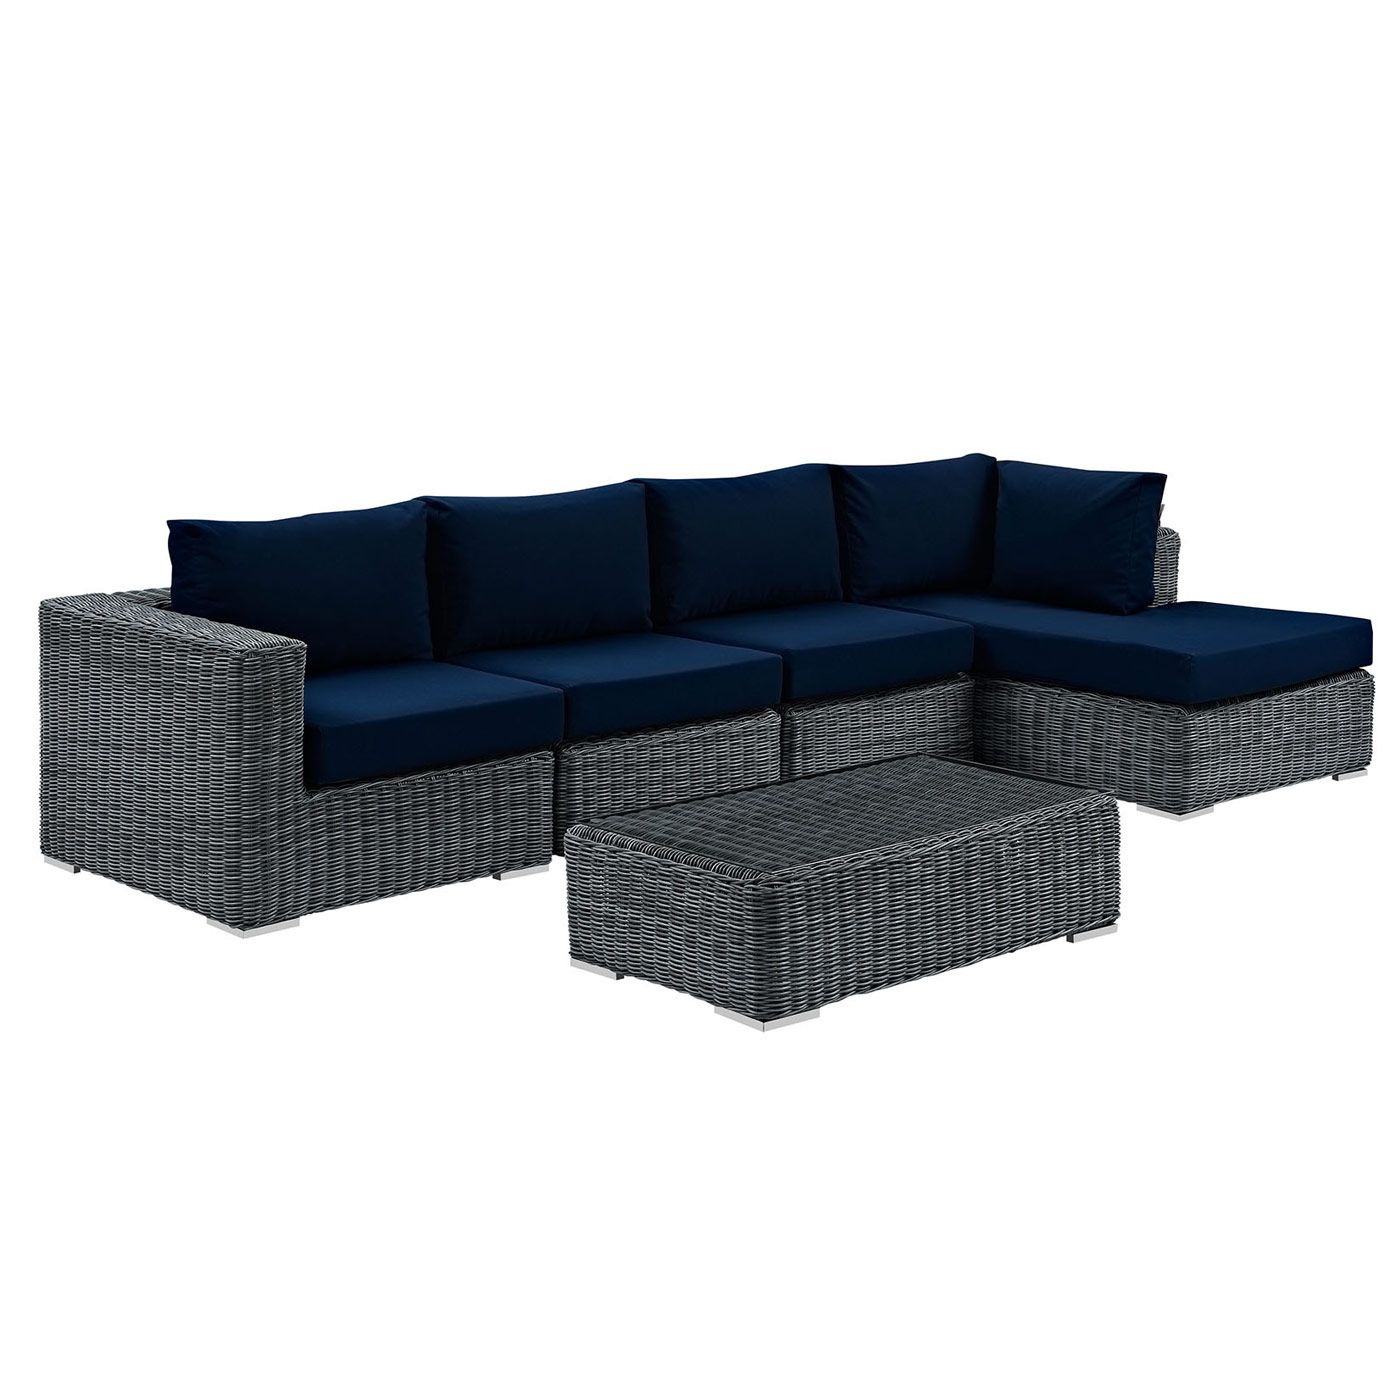 Modway Summon 5 Piece Patio Sofa Sectional Set With Coffee Table Free Regarding 5 Piece Console Tables (View 4 of 20)